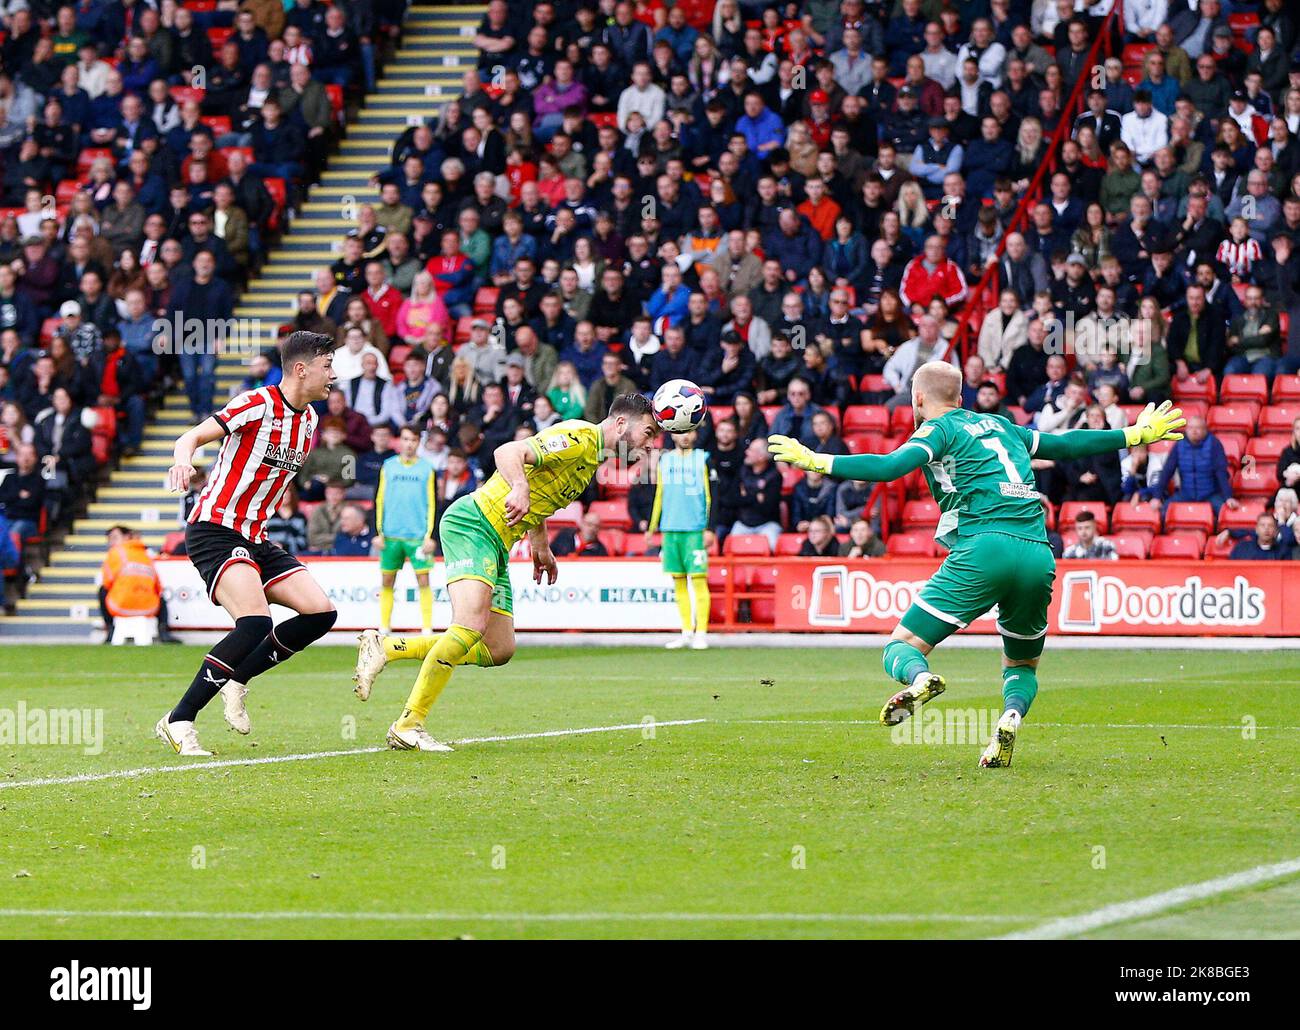 Sheffield, UK. 22nd Oct, 2022. Grant Hanley of Norwich City heads for goal during the Sky Bet Championship match between Sheffield United and Norwich City at Bramall Lane on October 22nd 2022 in Sheffield, England. (Photo by Mick Kearns/phcimages.com) Credit: PHC Images/Alamy Live News Stock Photo